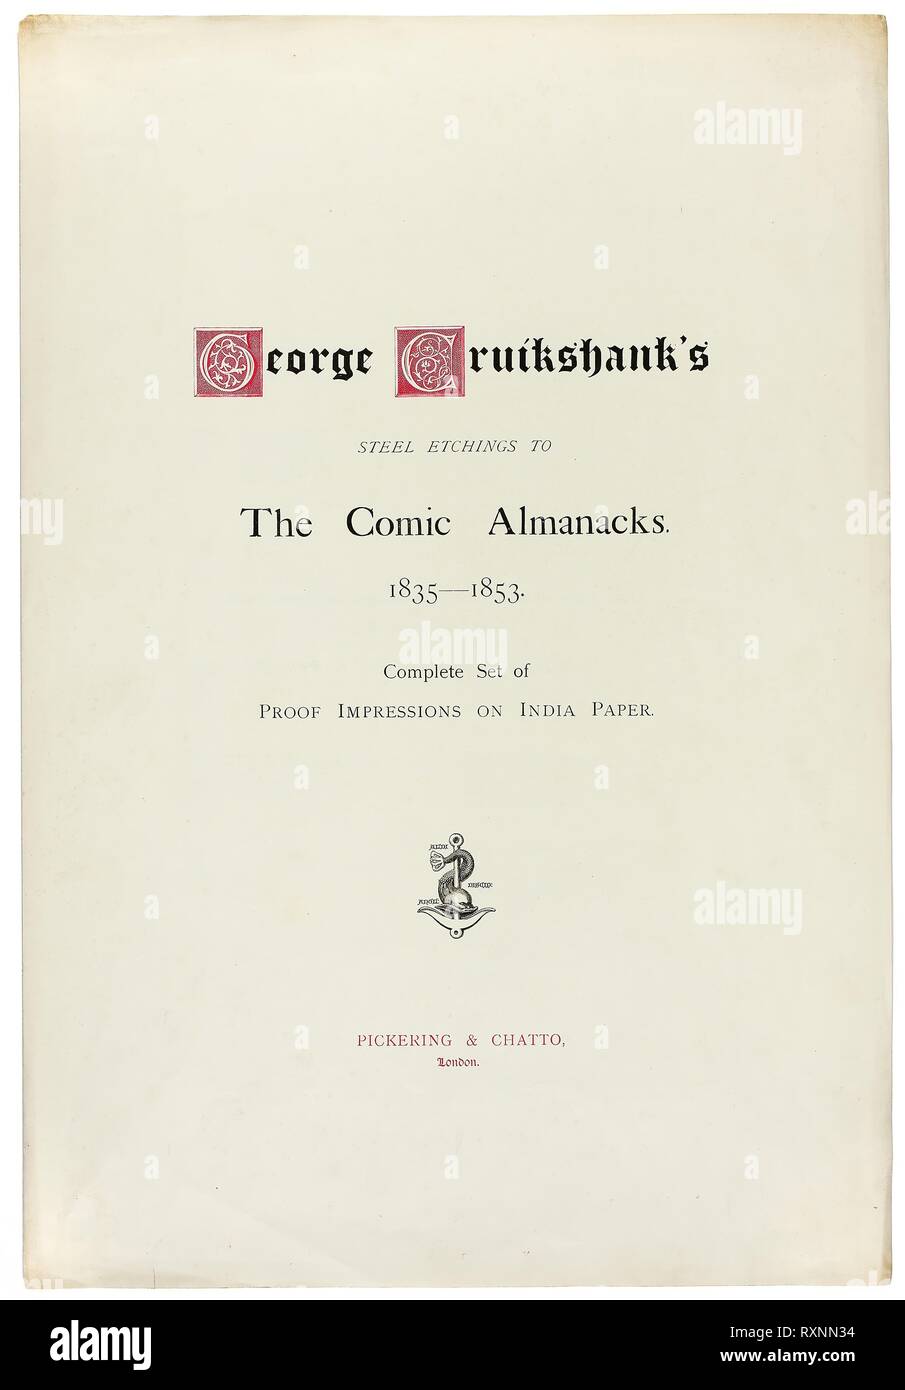 Title Page from George Cruikshank's Steel Etchings to The Comic Almanacks: 1835-1853. George Cruikshank (English, 1792-1878); published by Pickering &amp; Chatto (English, 19th century). Date: 1880. Dimensions: 507 × 345 mm. Letterpress in red and black on cream wove paper, folded. Origin: England. Museum: The Chicago Art Institute. Stock Photo